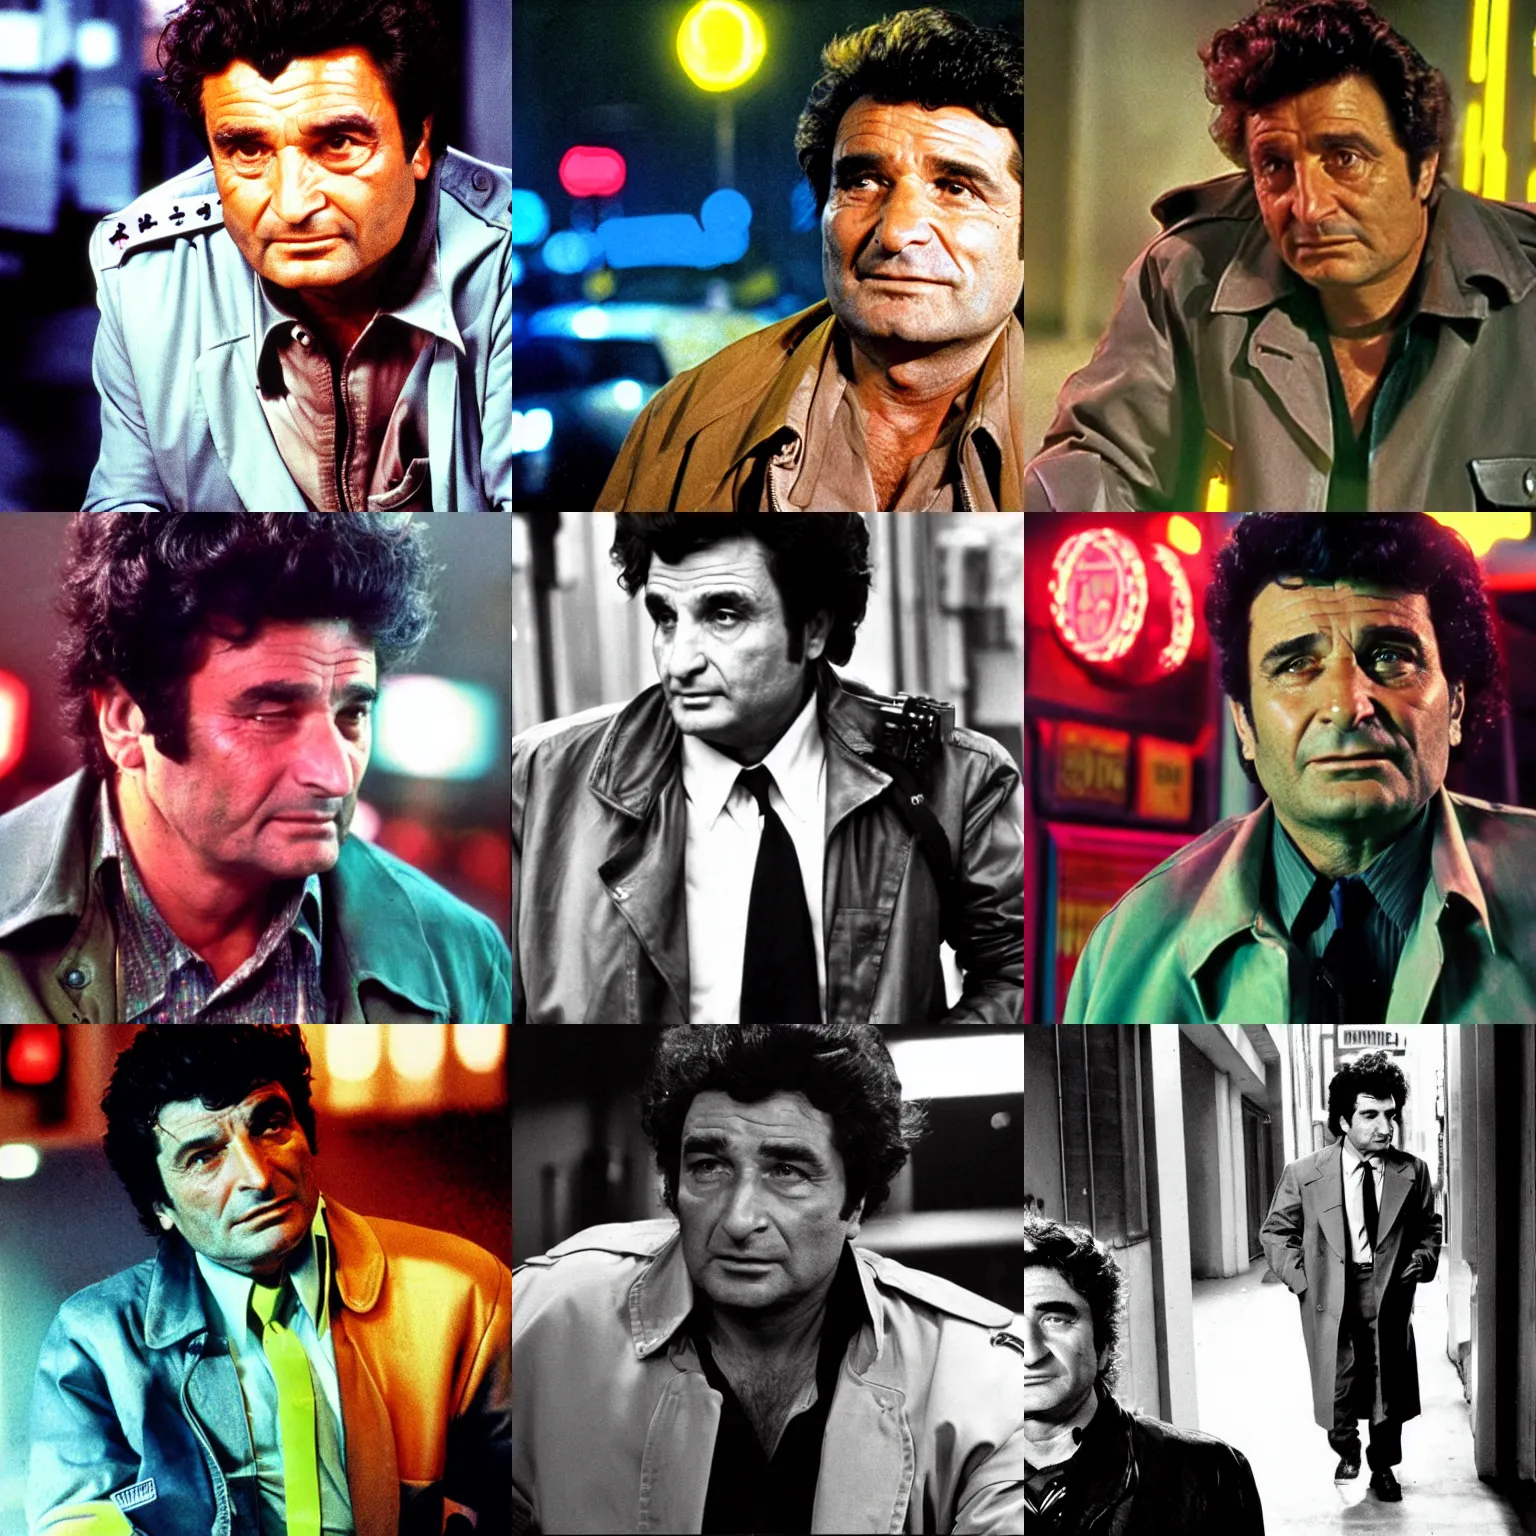 Prompt: 8 0 s neon cyberpunk police detective columbo ( played by young peter falk ) in his messy trenchcoat, smirking, in a cyberpunk city, led lights